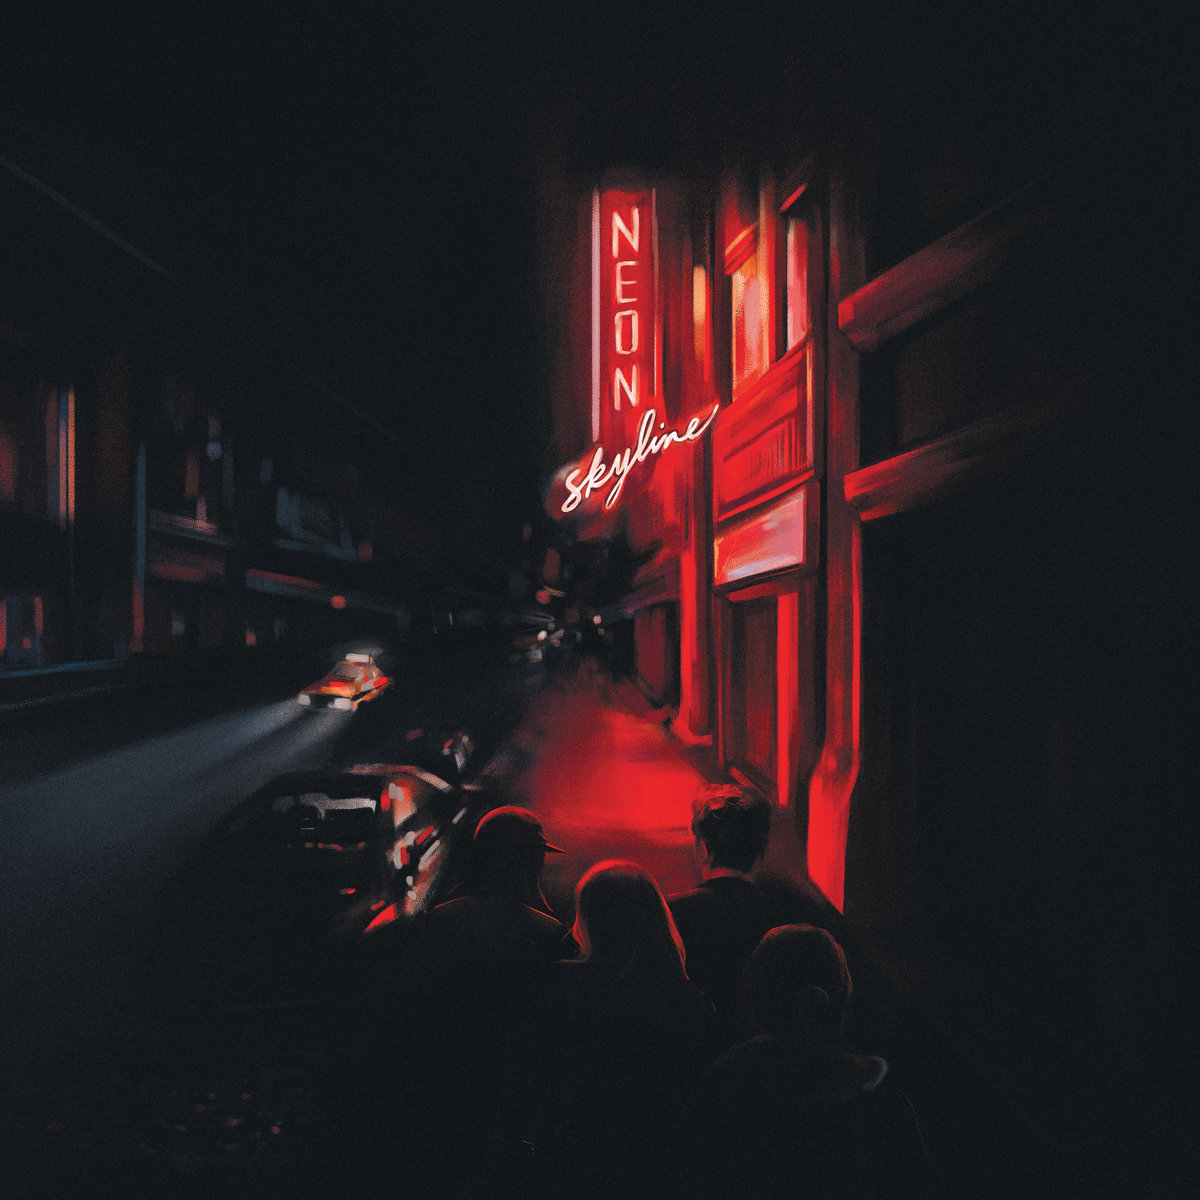 Neon Skyline by Andy Shauf album art. A red skyline with people's silhouettes in the foreground.